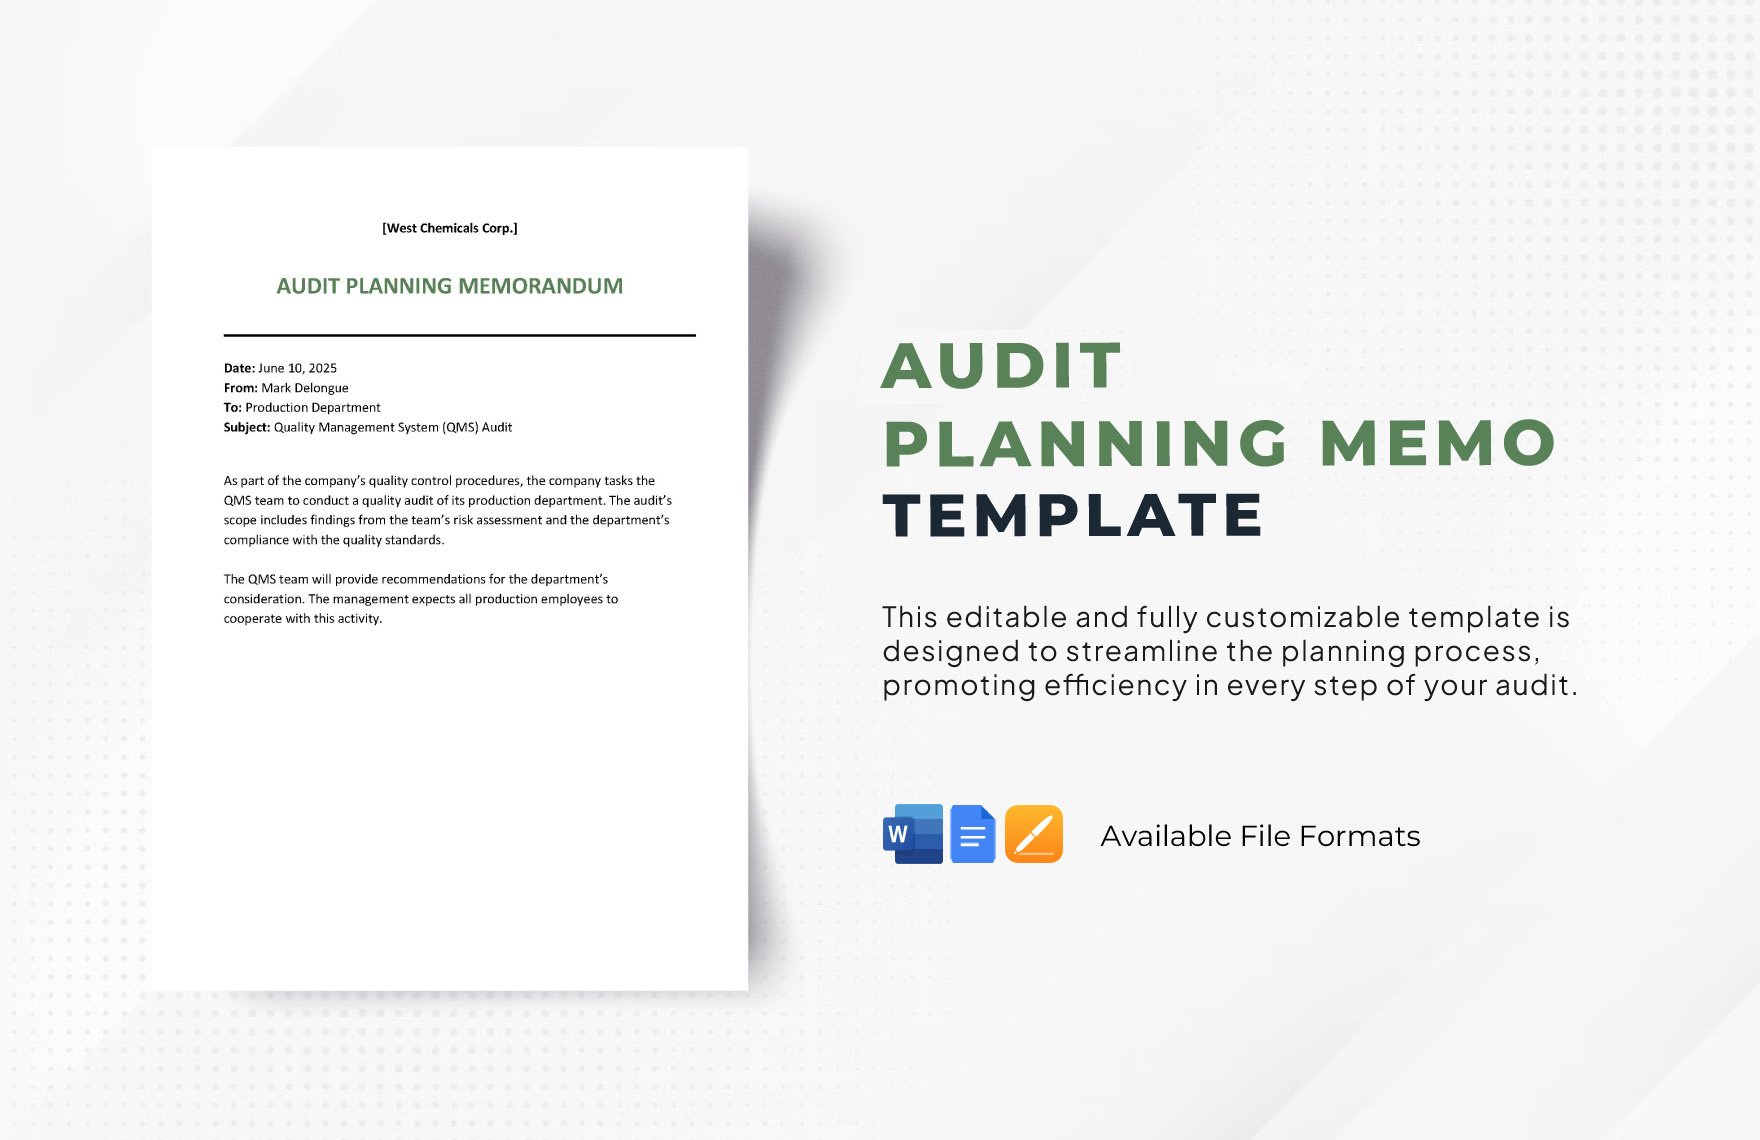 Free Audit Planning Memo Template in Word, Google Docs, Apple Pages